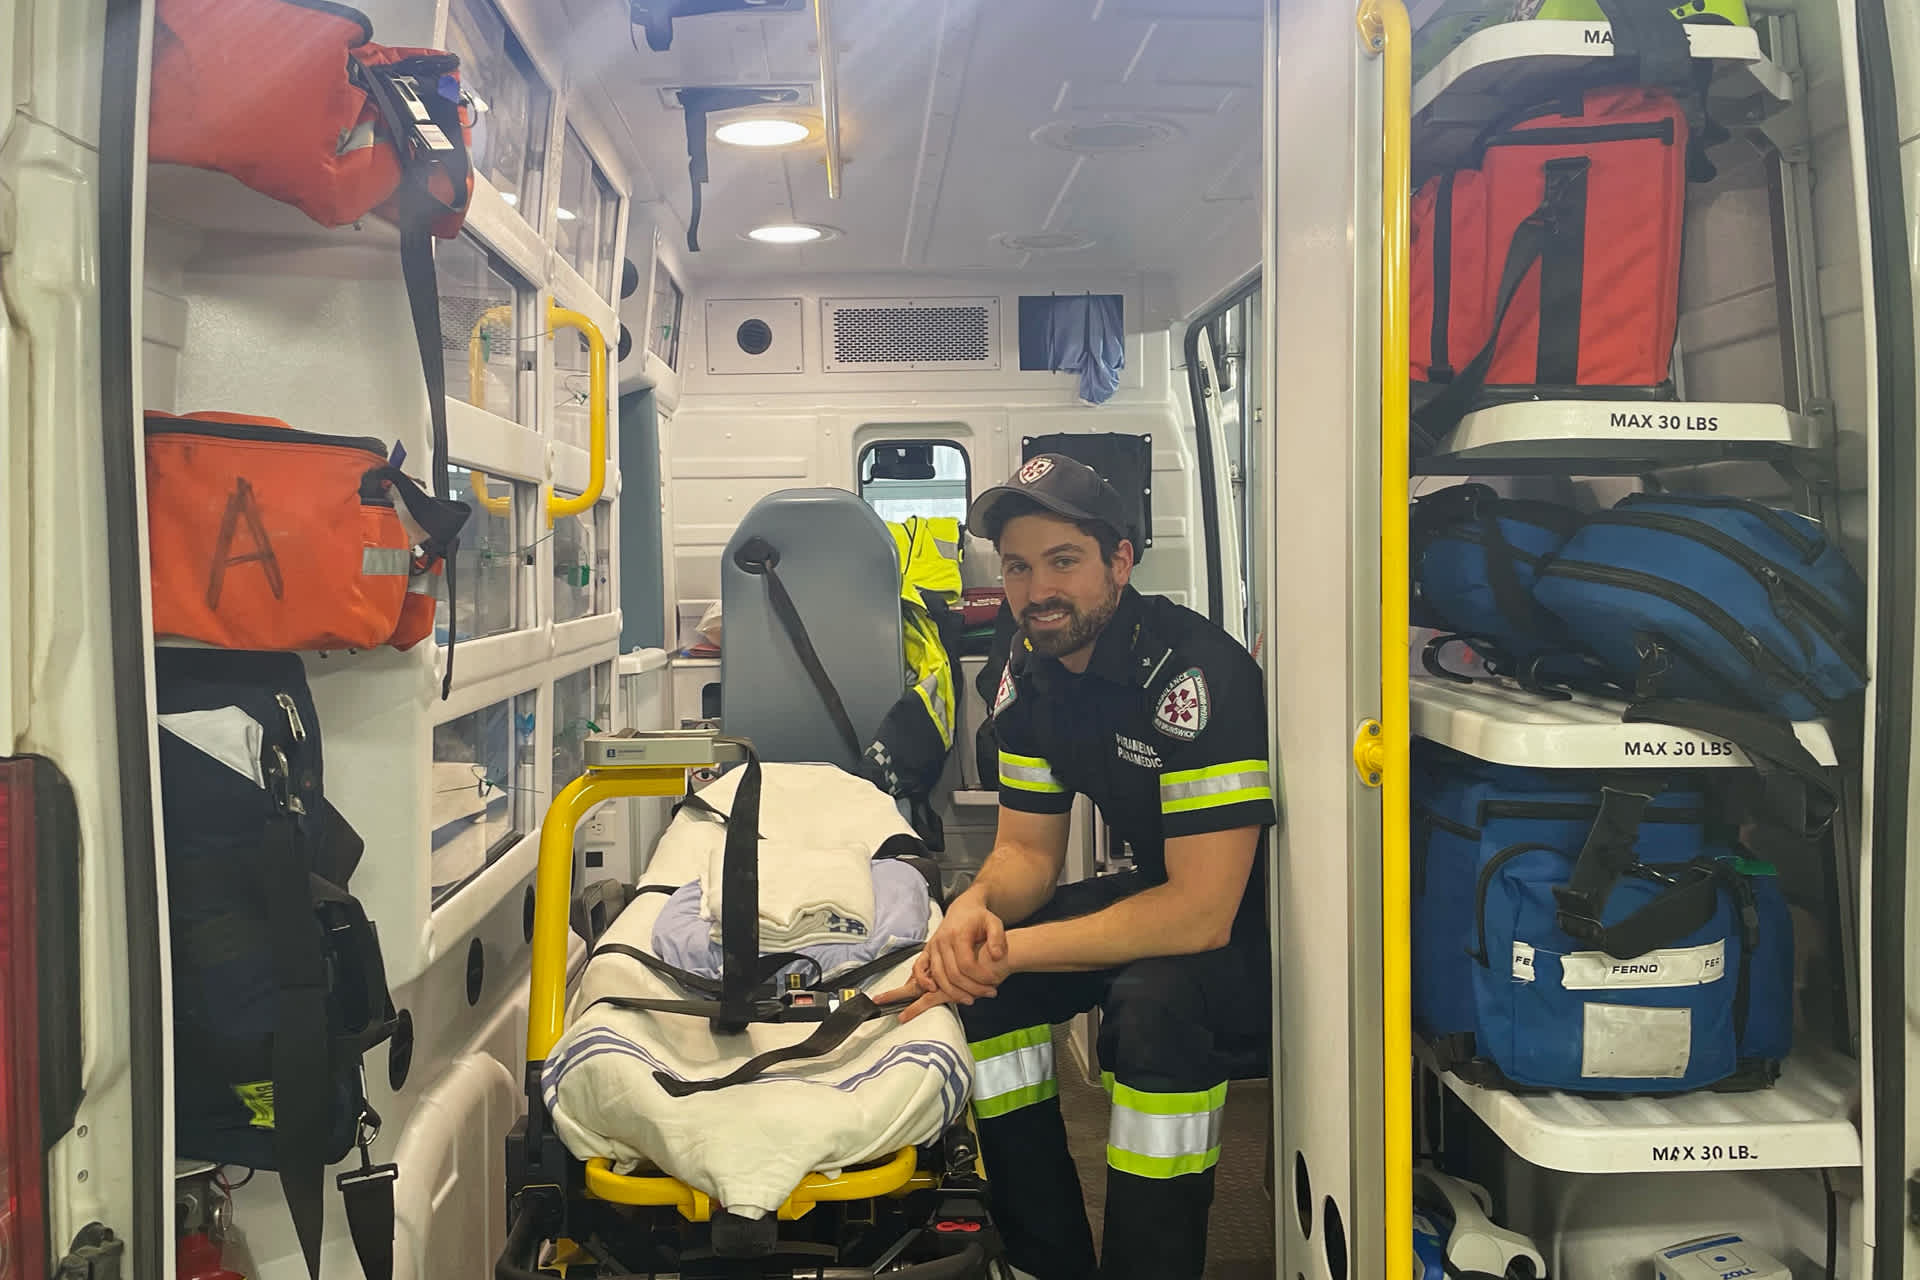 A paramedic sitting in the back of an ambulance